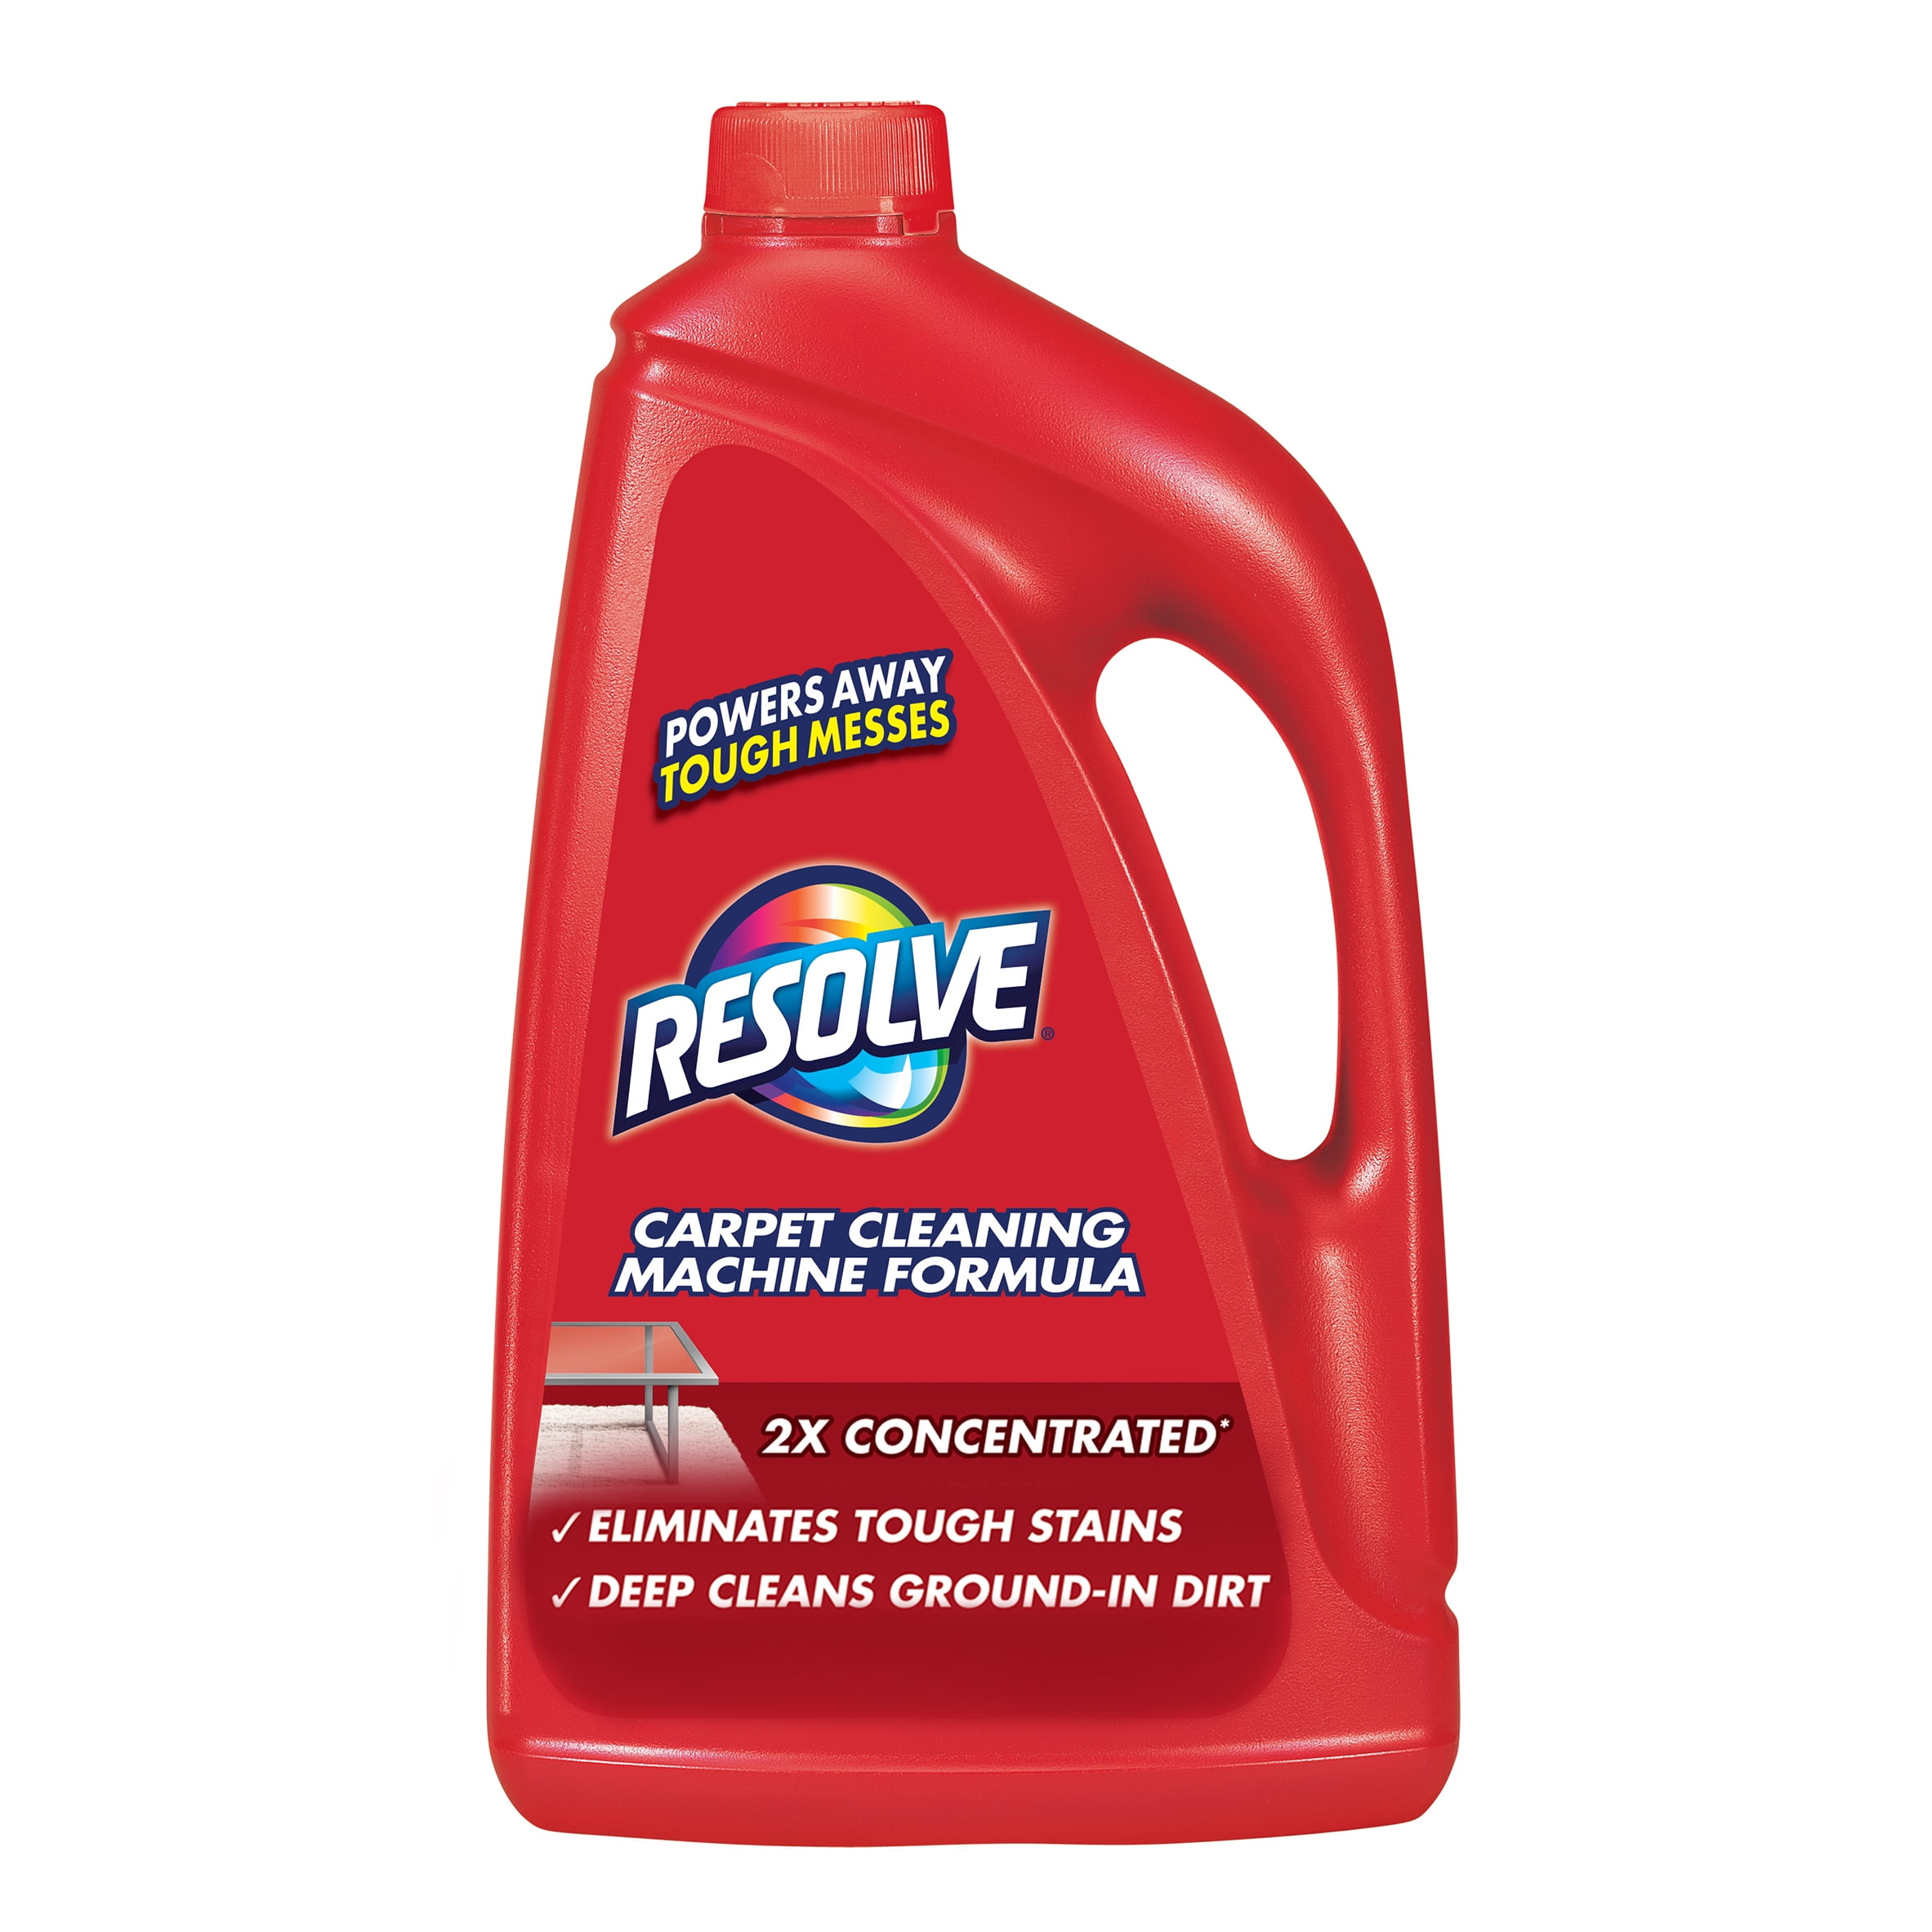 Great Value (Walmart) Foaming Carpet Cleaner Carpet Stain Remover Review -  Consumer Reports